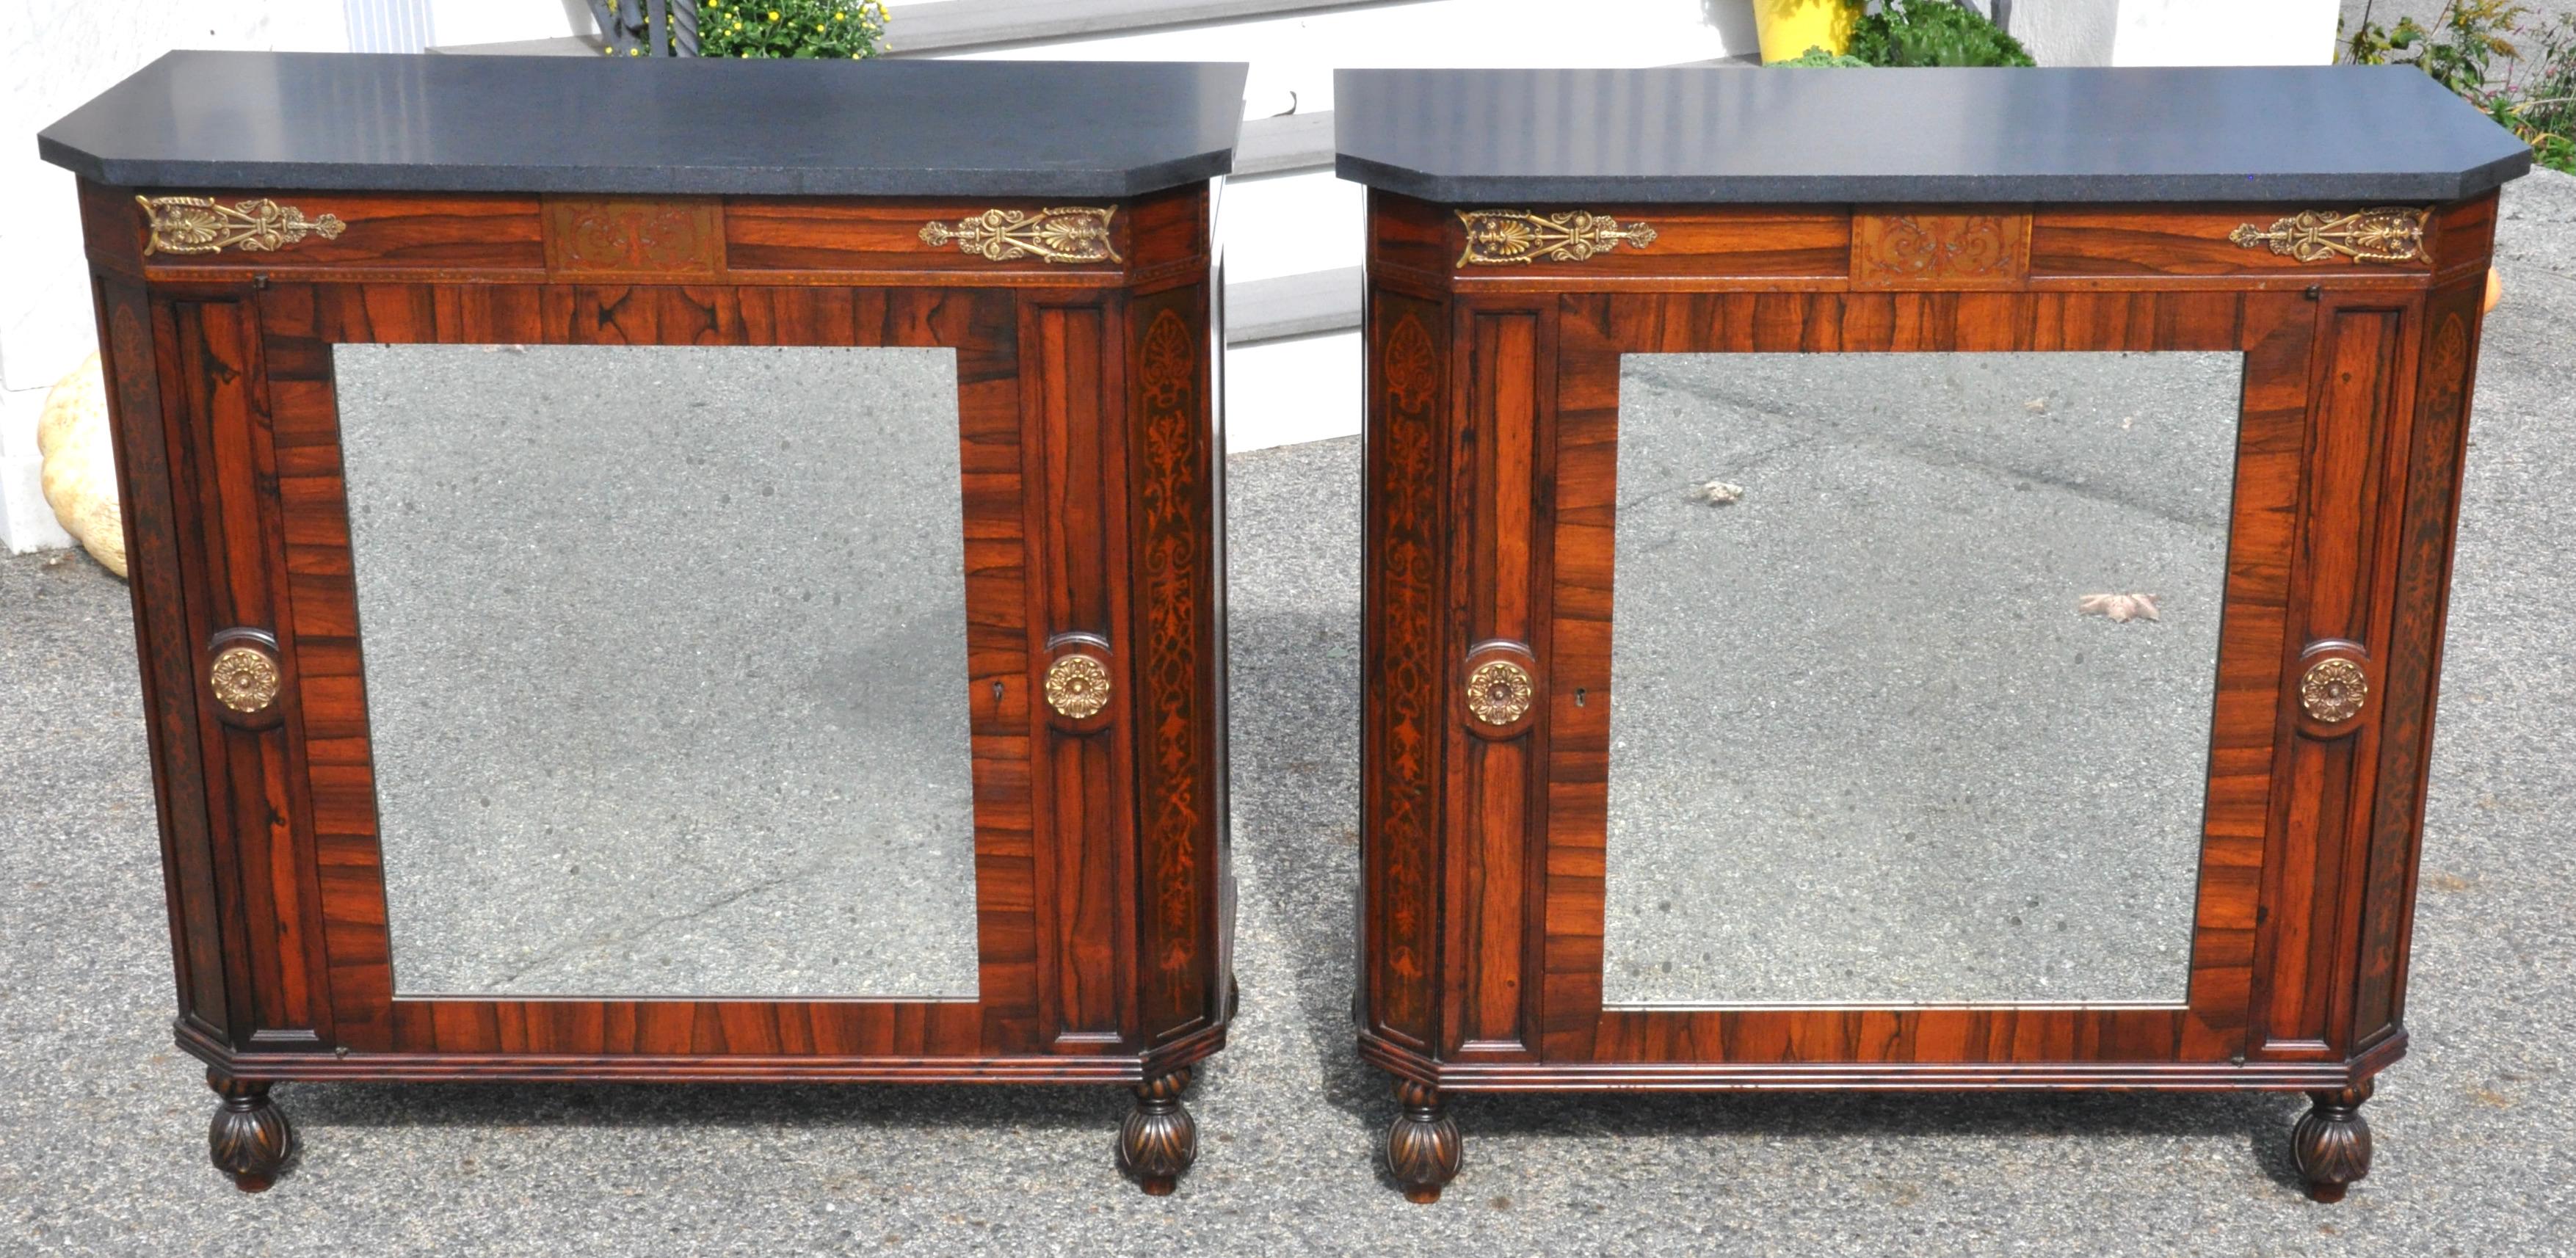 Pair of Regency style rosewood and inlaid marble top side cabinets. Mirrored door reveal rosewood shelves. Carved feet.